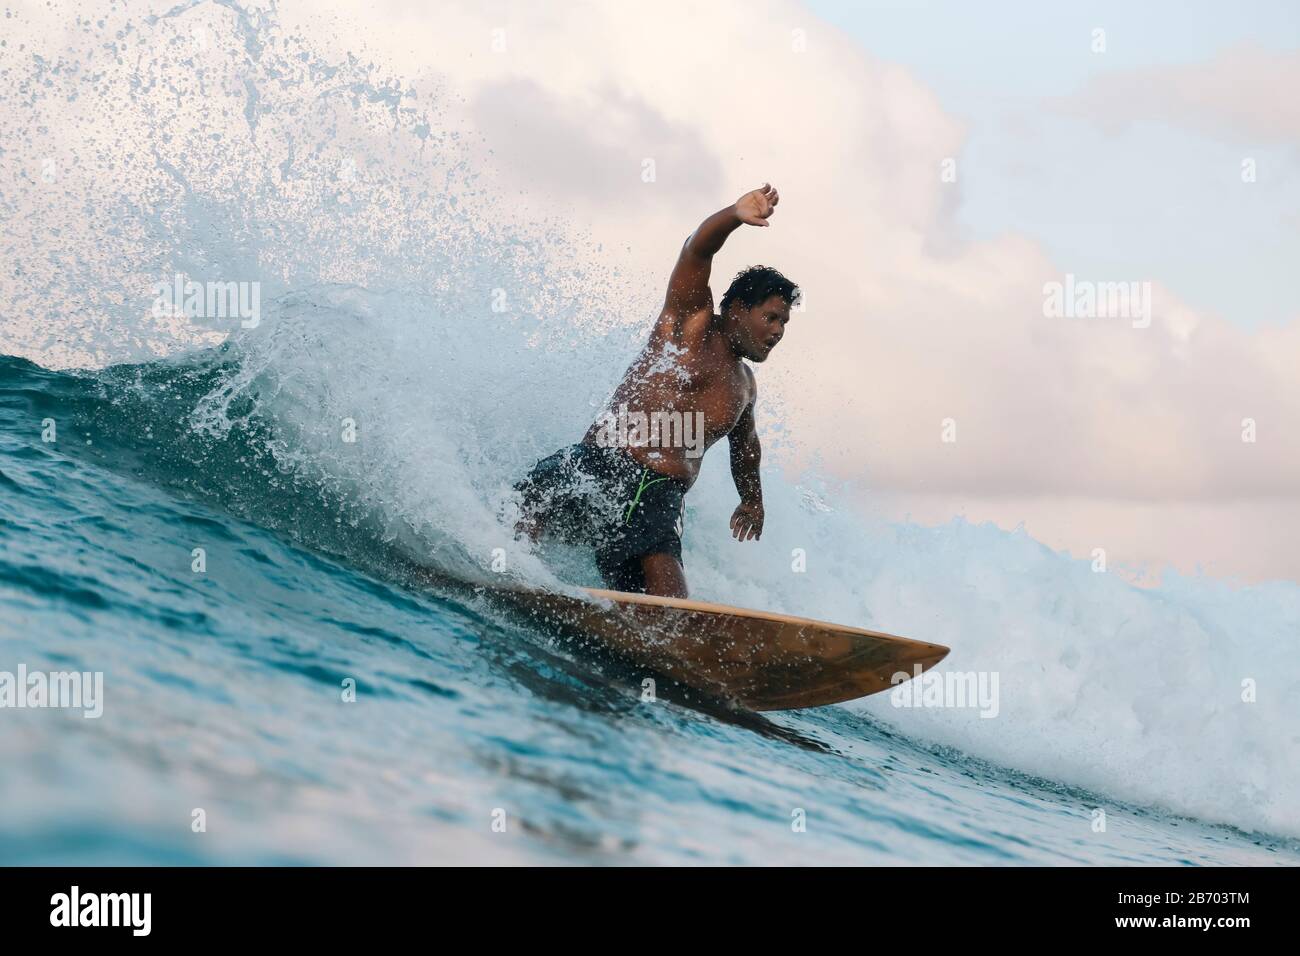 Surfer on a wave at day time Stock Photo